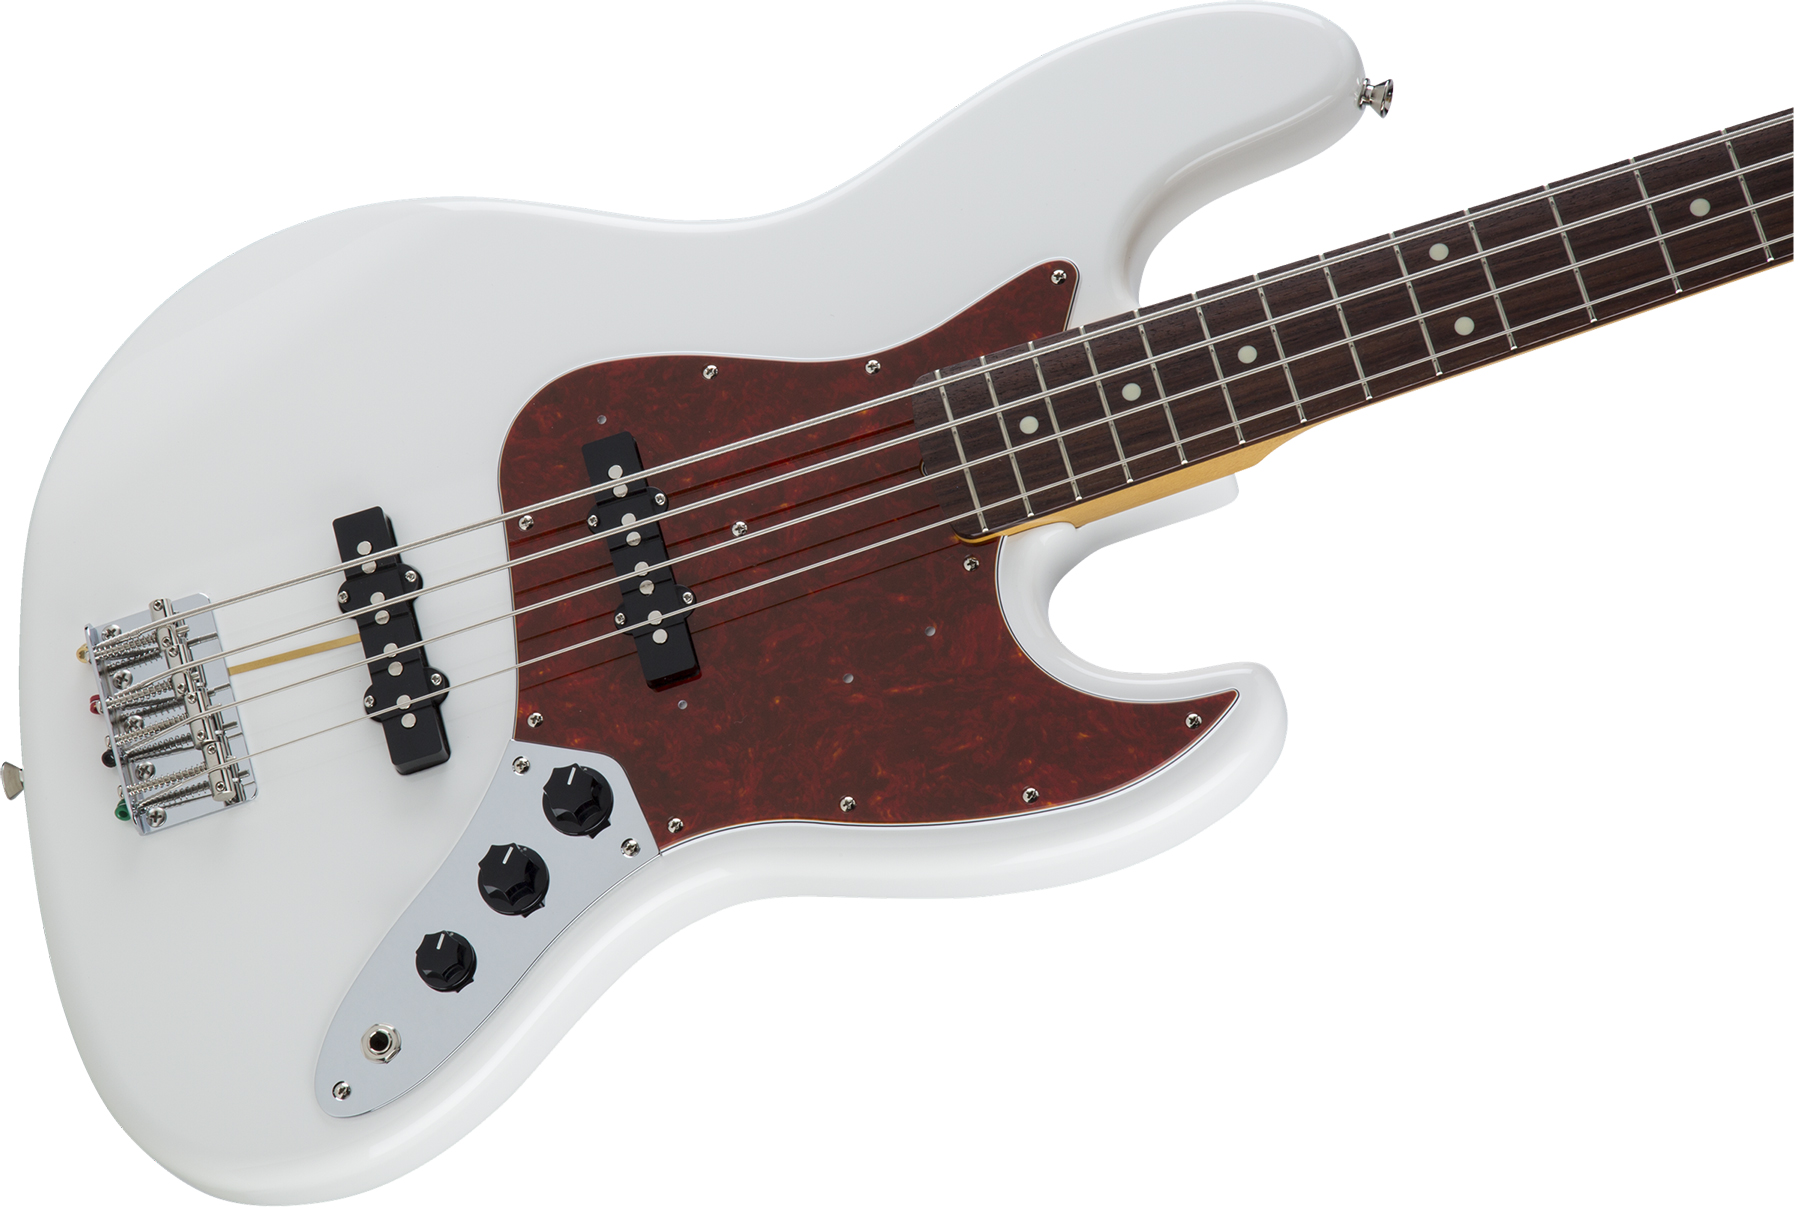 Fender Jazz Bass Traditional Ii 60s Jap 2s Trem Rw - Olympic White - Basse Électrique Solid Body - Variation 2